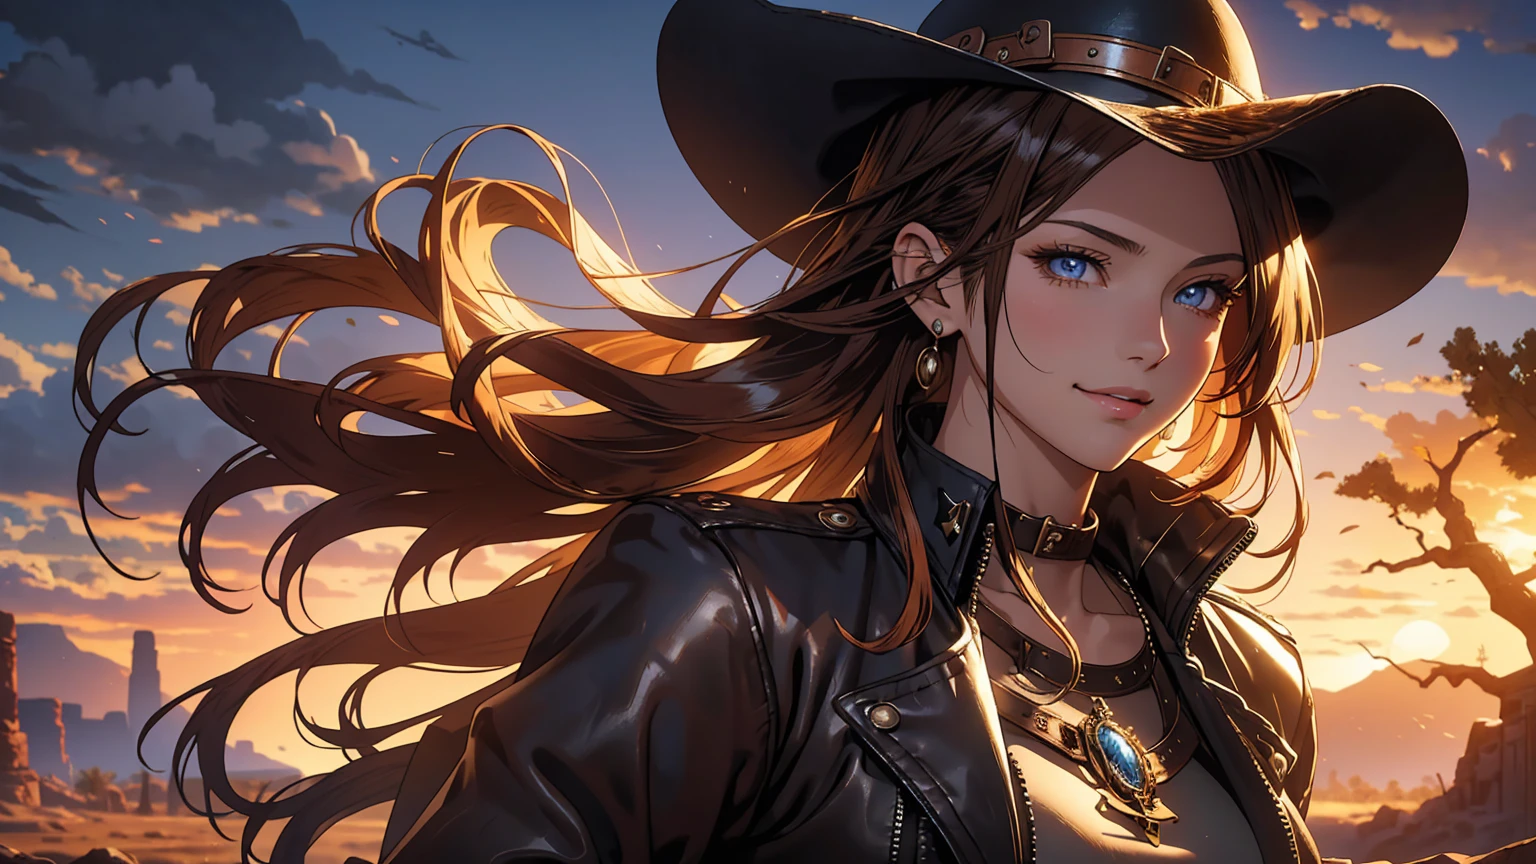 Arte de anime Genshin Impact: ((masterpiece: 1.2, 16k, super detail, best quality, accurate, high resolution, high quality)), (Wallpaper), Young cute cowgirl, age 18, super model, smiling, short brown leather jacket with open front, cowboy belt, brown cowboy hat, leather boots, braided hair, elegant posture, elegant cowgirl in the spotlight, illustrative style inspiration from the Charles Marion Russell, , strength, confidence, full body portrait, standing, top model pose, seductive expression, Full breasts, Tight shirt, Midriff, beautiful latin girl, looking at the spectators, beautiful and charming girl, perfect clean model face, exquisite facial features, detailed face, clear facial expressions, long wavy hair, gradient hair, beautiful detailed eyes, piercing and enchanting eyes, luscious lips, beautiful detailed glossy lips, rosy cheek, enchanting smile, perfect body, slim waist, dynamic poses, solo girl, wild west setting, plain of the American West, wide and warm old sky, the sunset, a desert with dry soil and sparse thorn trees, rocky mountains, winding river with vegetation on the banks, rusty railway track, rock formations, ruins of a miner's cabin, dilapidated railroad, complex background, very detailed illustration, Ultra-detailed CG, professional art, vibrant appearance, raw photo, (a majestic vision), (dramatic photo:1.4), cinematic, (HDR:1.5), (intricate details:1.1), natural colors, splendid lighting effects, (dramatic light), (Cinematic lighting), epic and surrealistic anime, detailed anime digital art, anime digital art, high-quality anime art style, award winning,